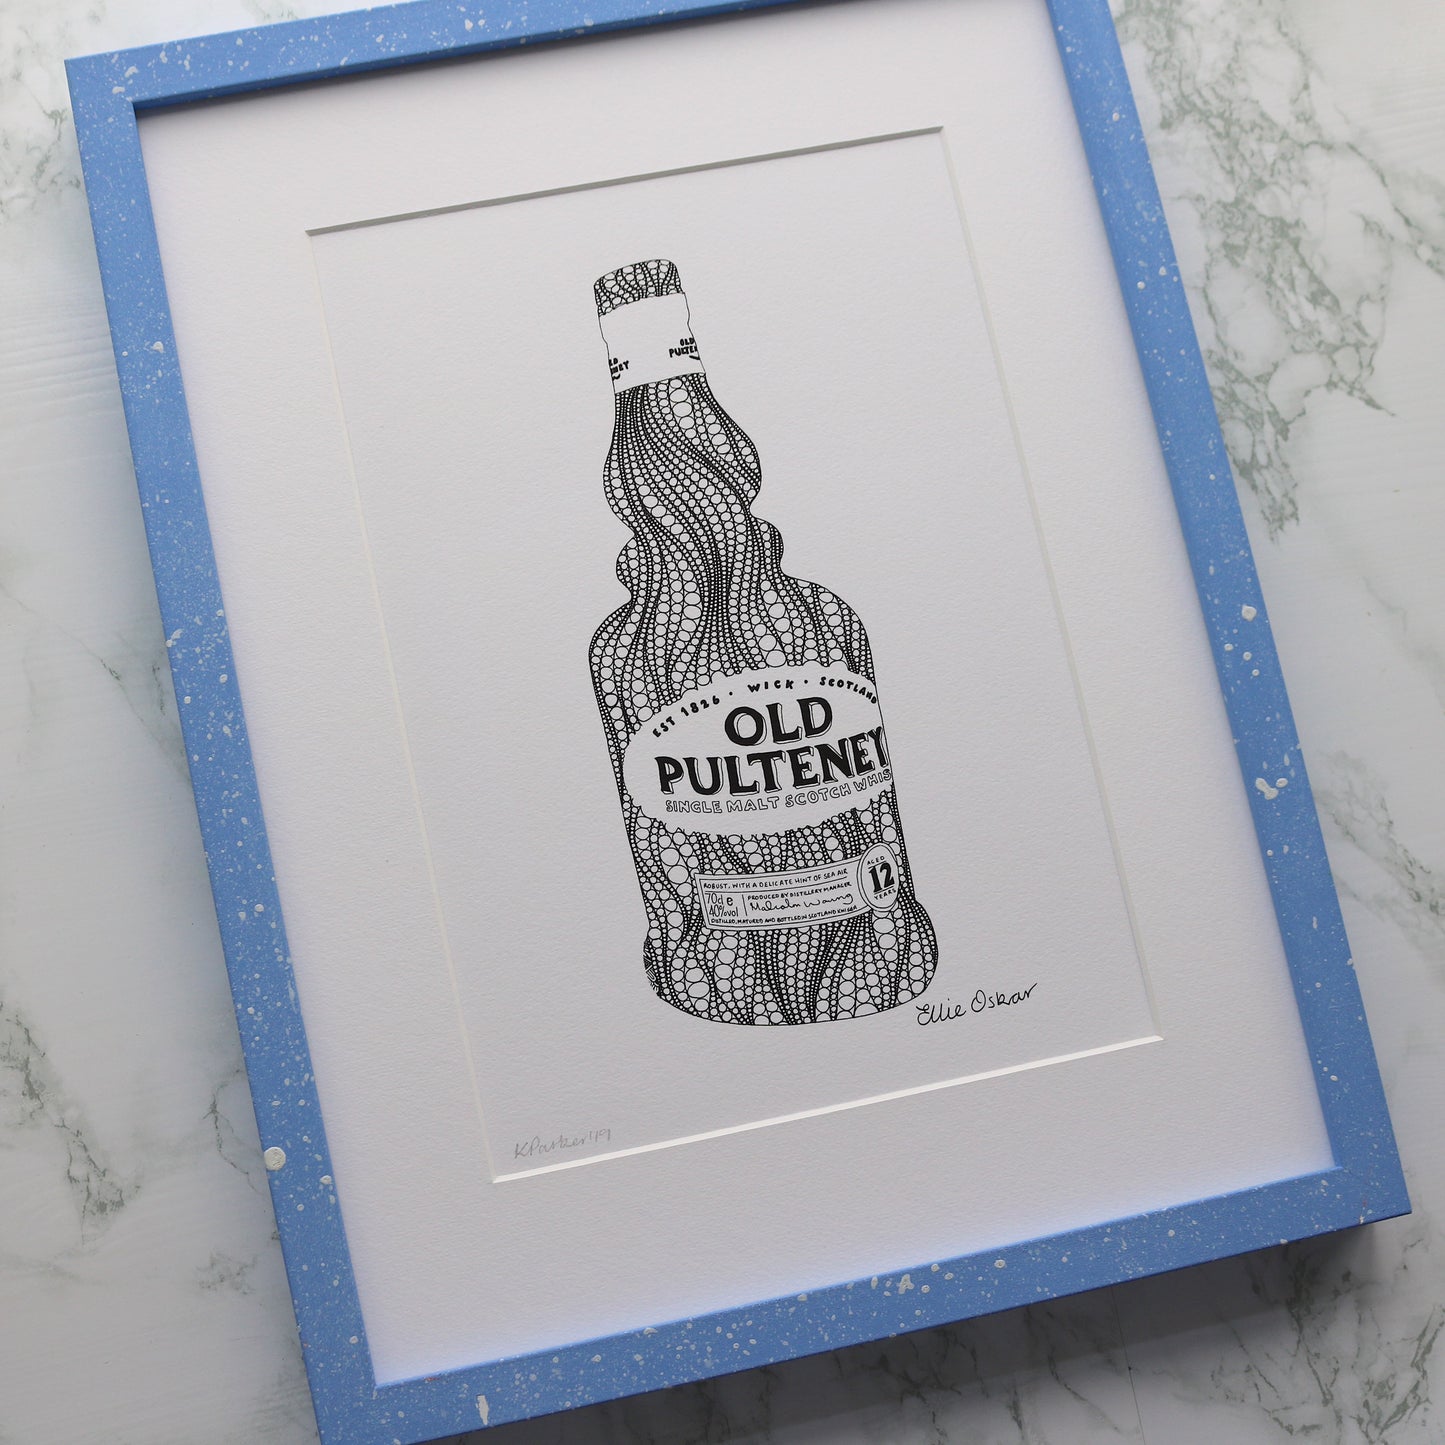 Old Pulteney Print